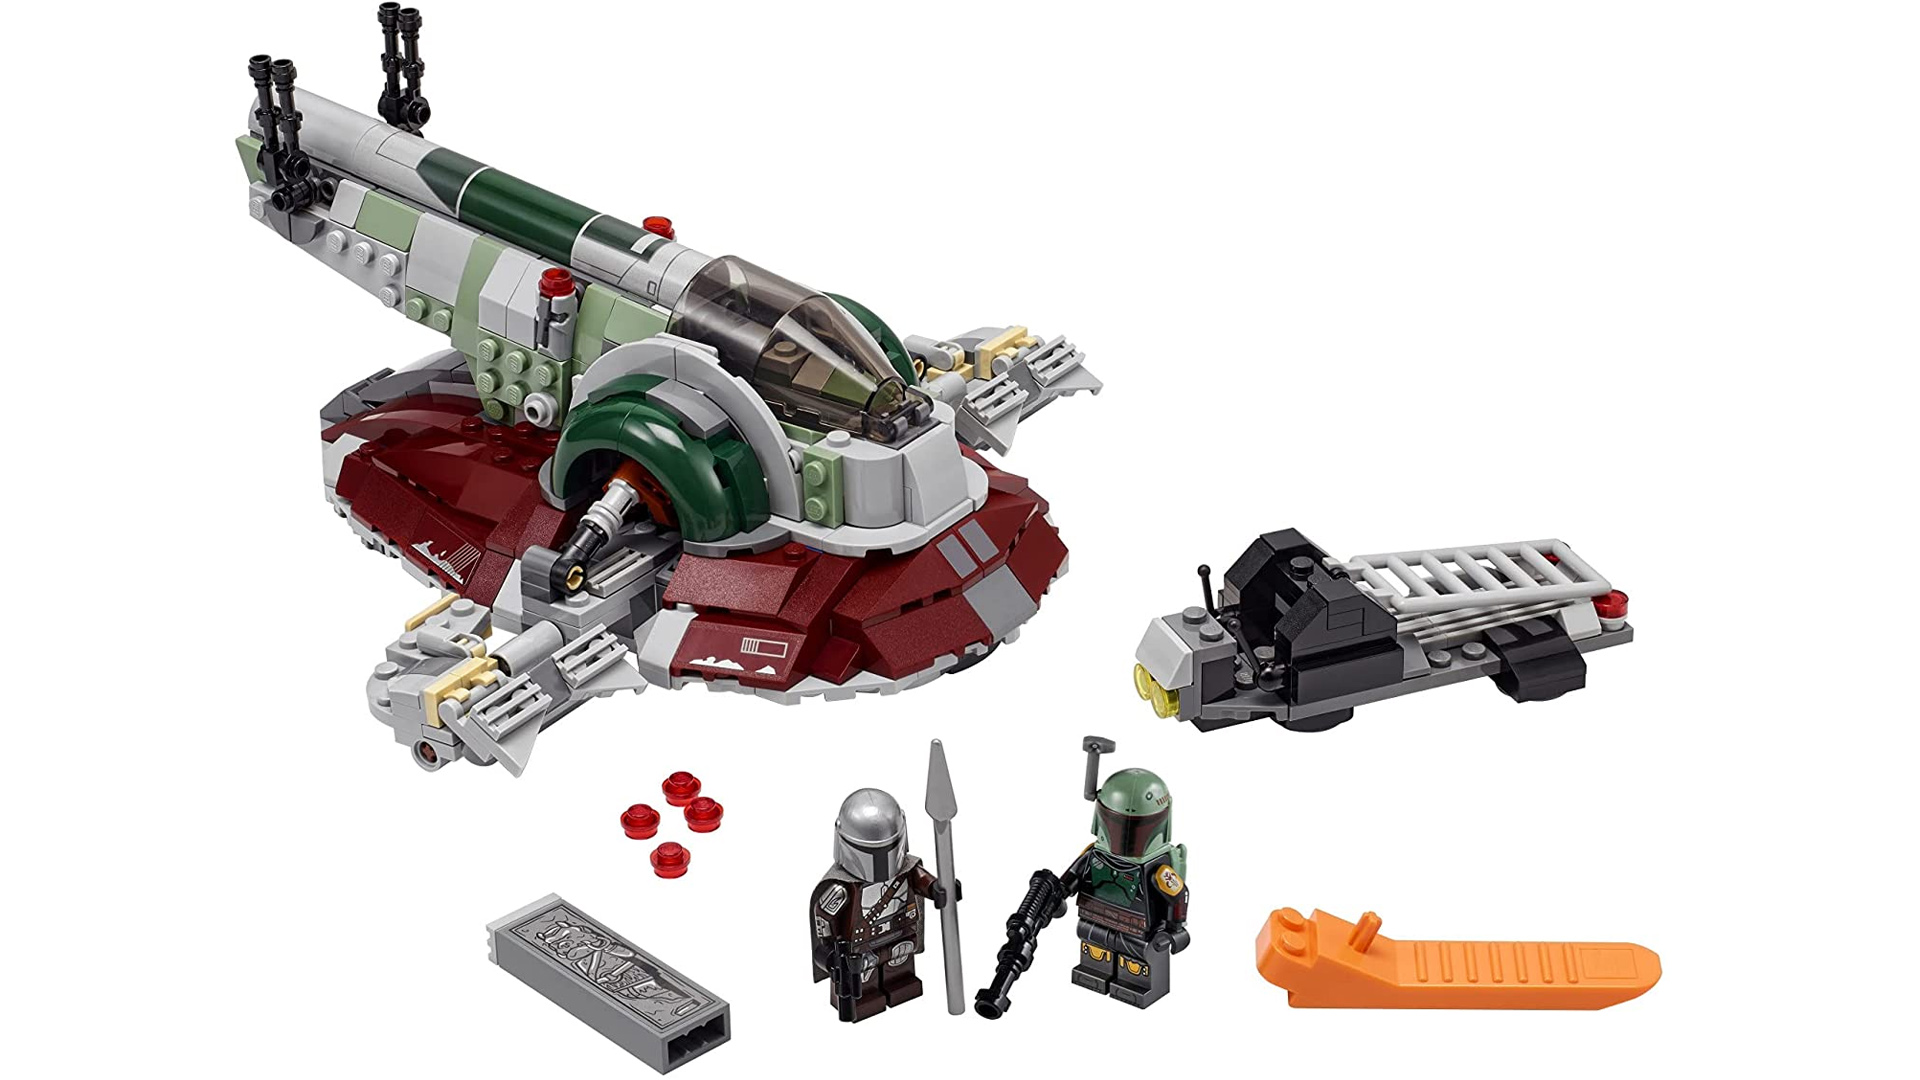 This Lego Star Wars Boba Fett's Starship set is 20% off right now thumbnail